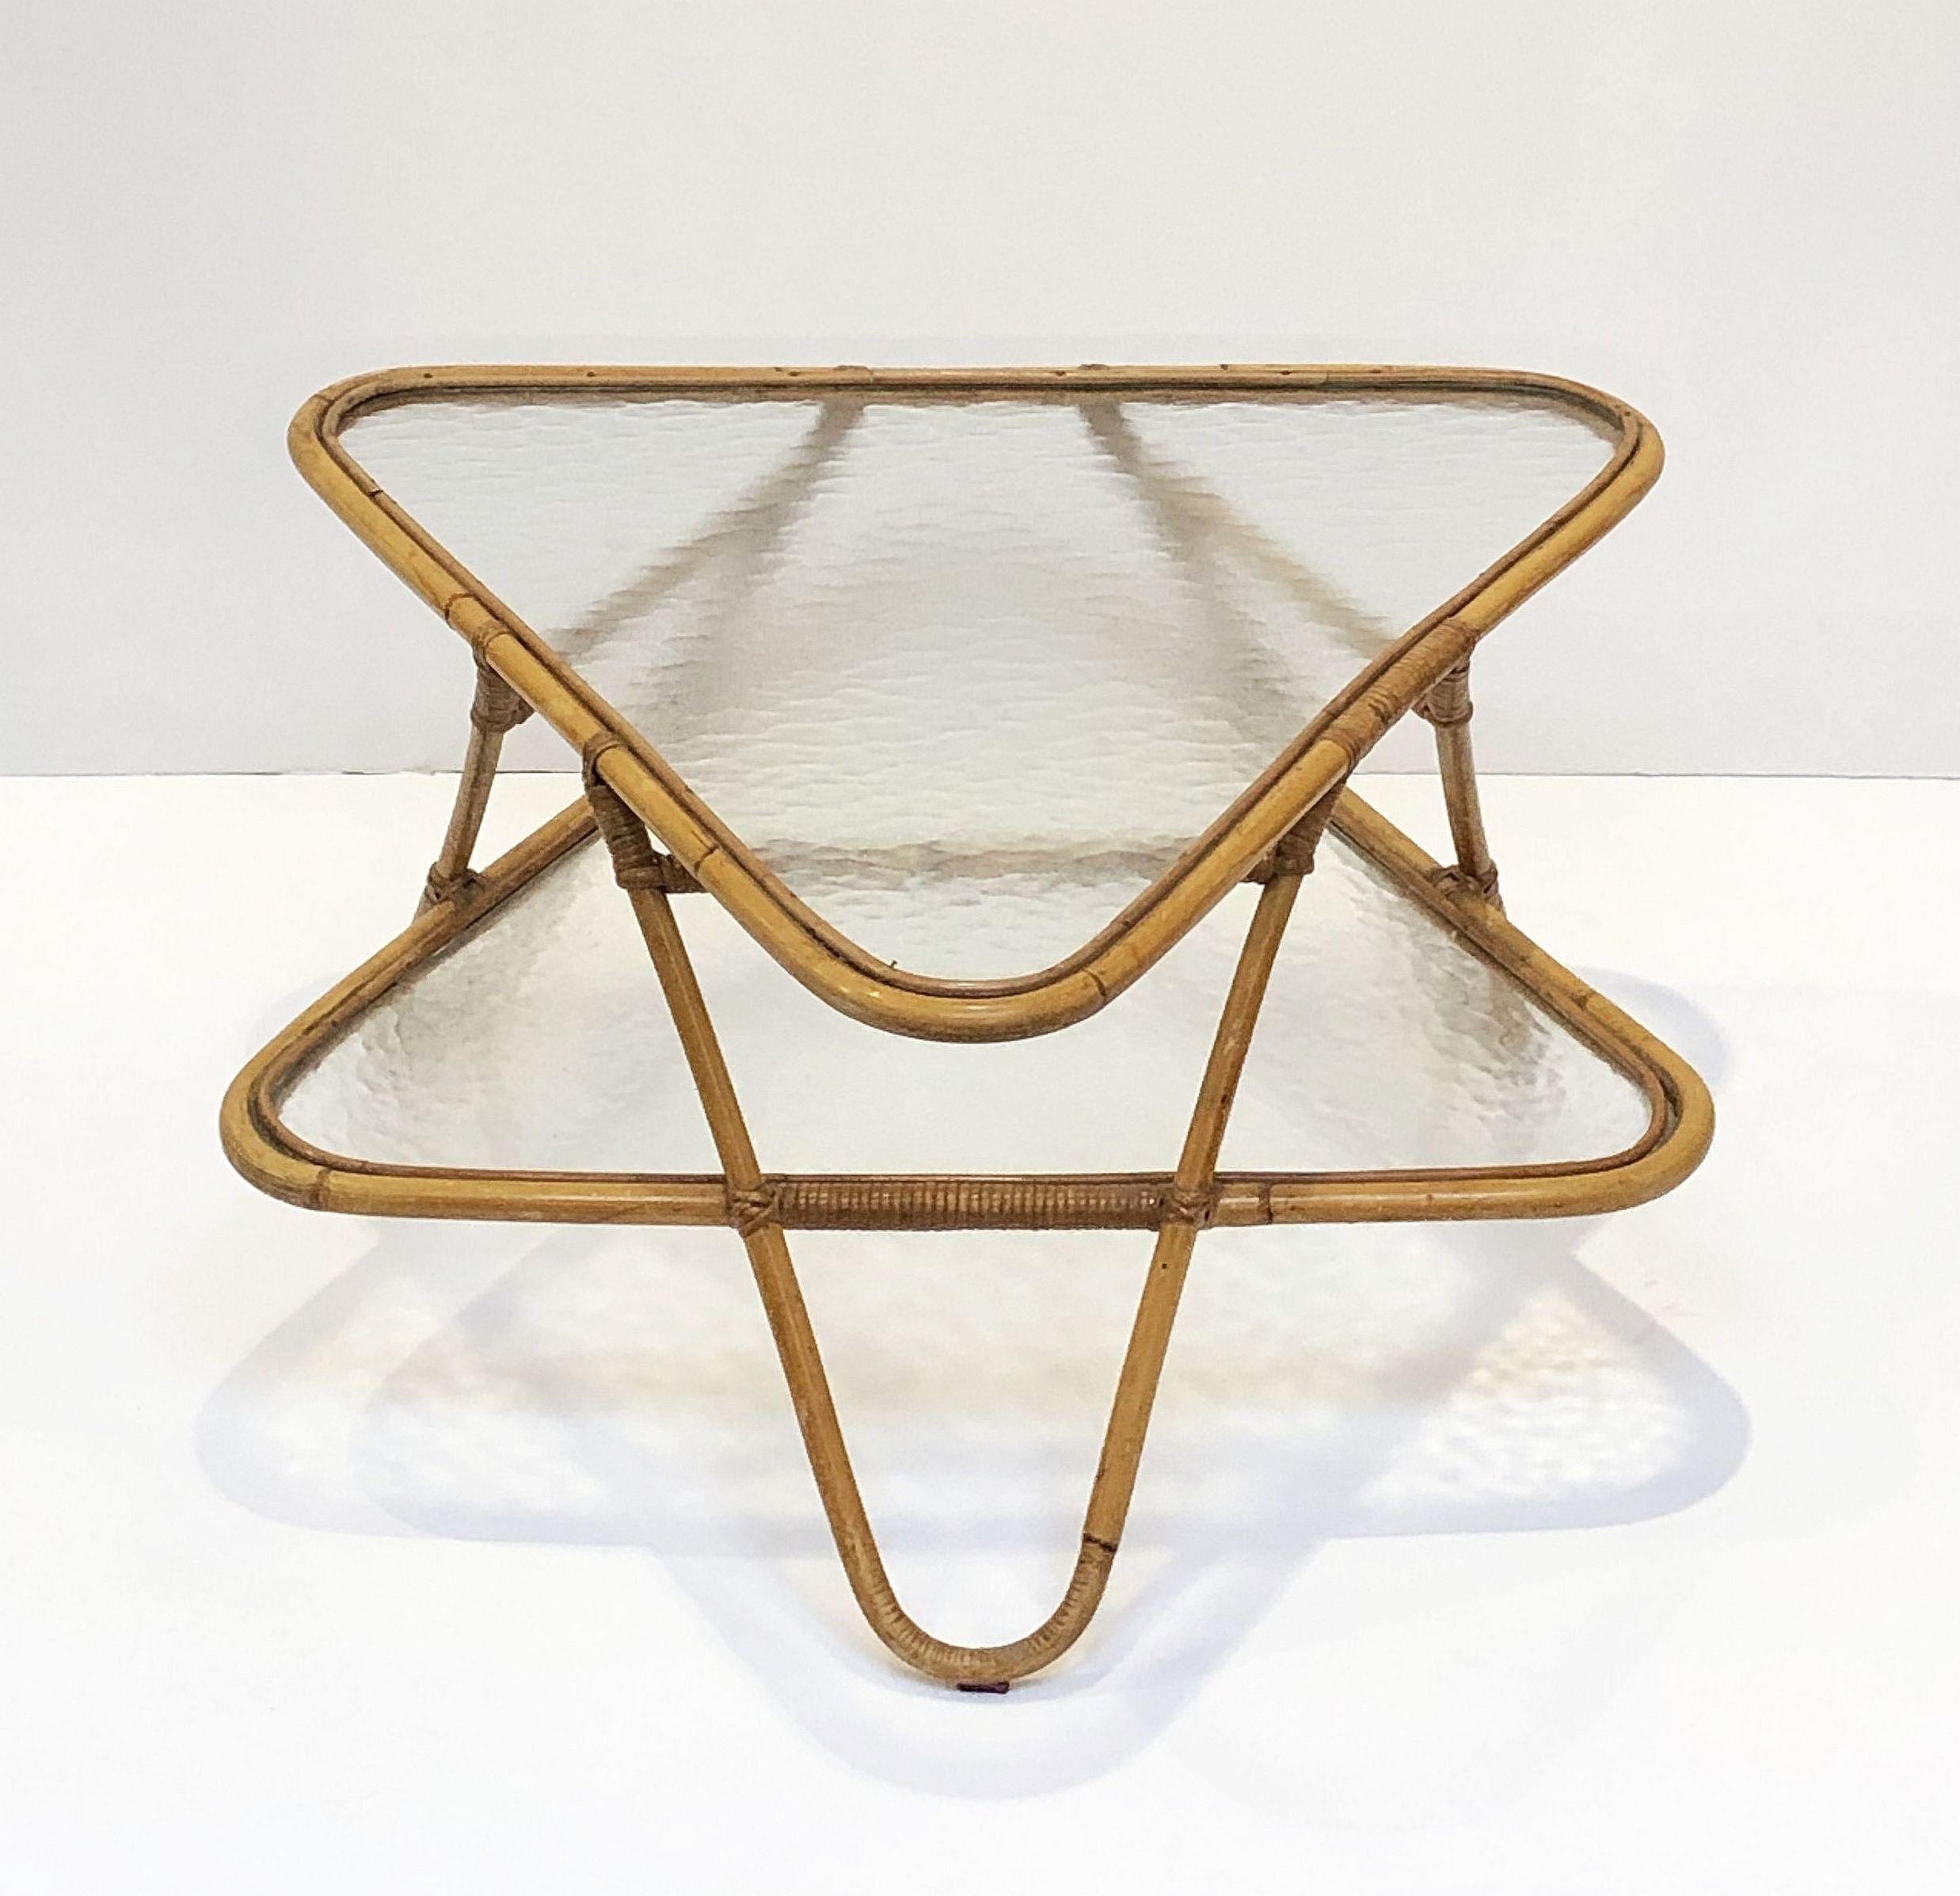 A fine French handcrafted midcentury rattan and bamboo low cocktail or coffee table.
Featuring a two-tiered body of two inverted glass triangles with decorative cane bamboo accents, the top tier with rounded corners over a bottom tier with three